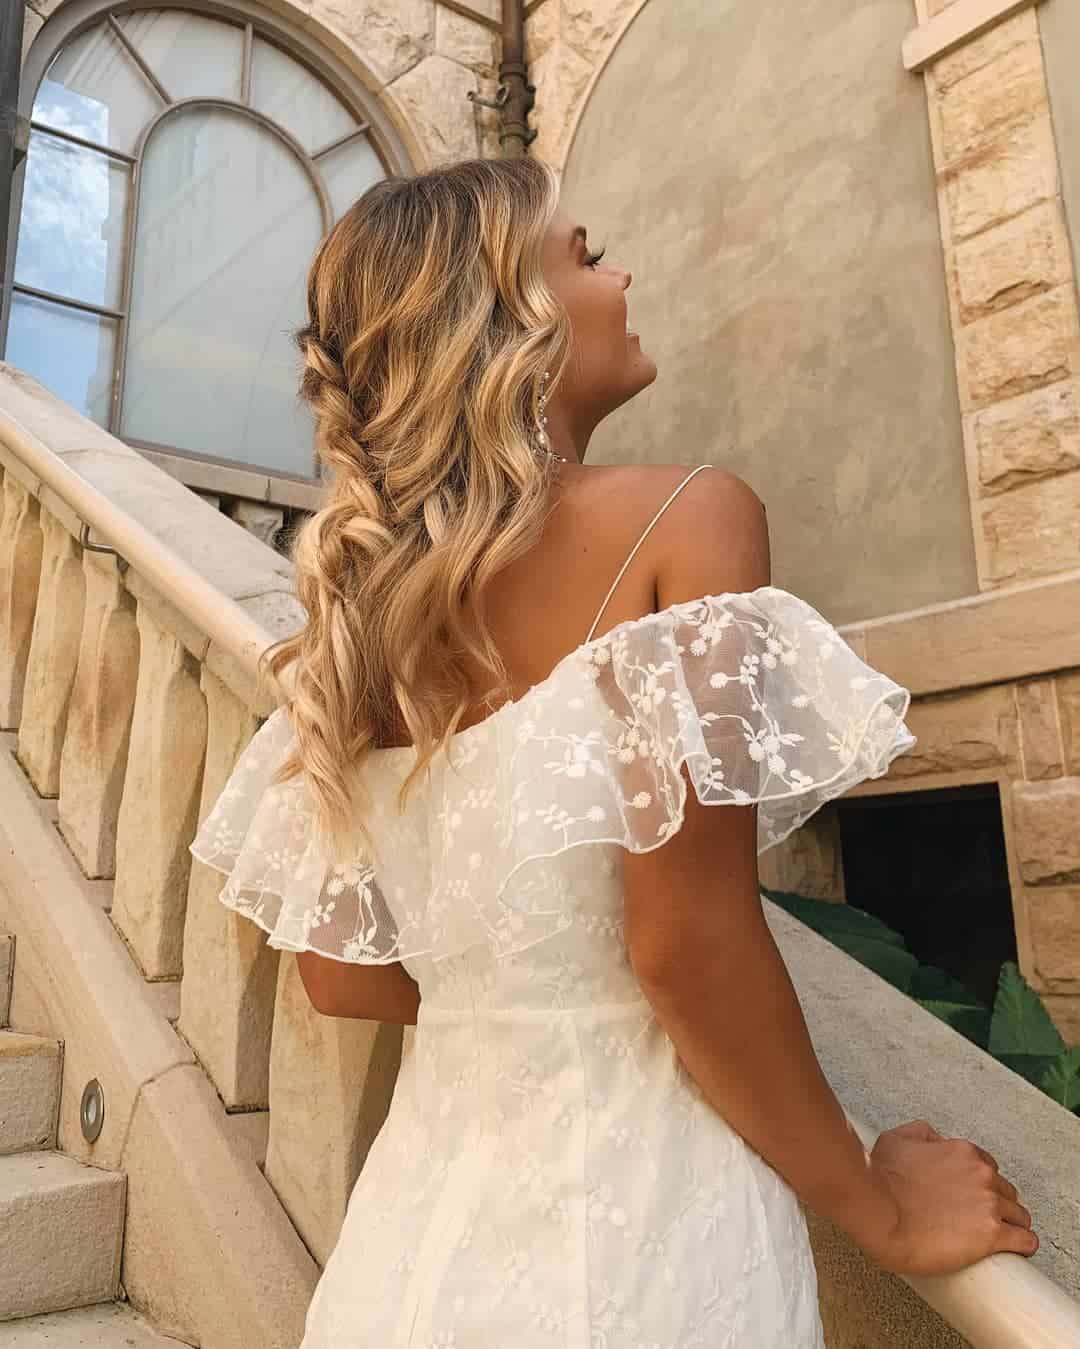 Cheap Affordable Wedding Dresses Fishtail Silhouette Showpo Bridal Lace Gown Brides Tight Wedding Budget